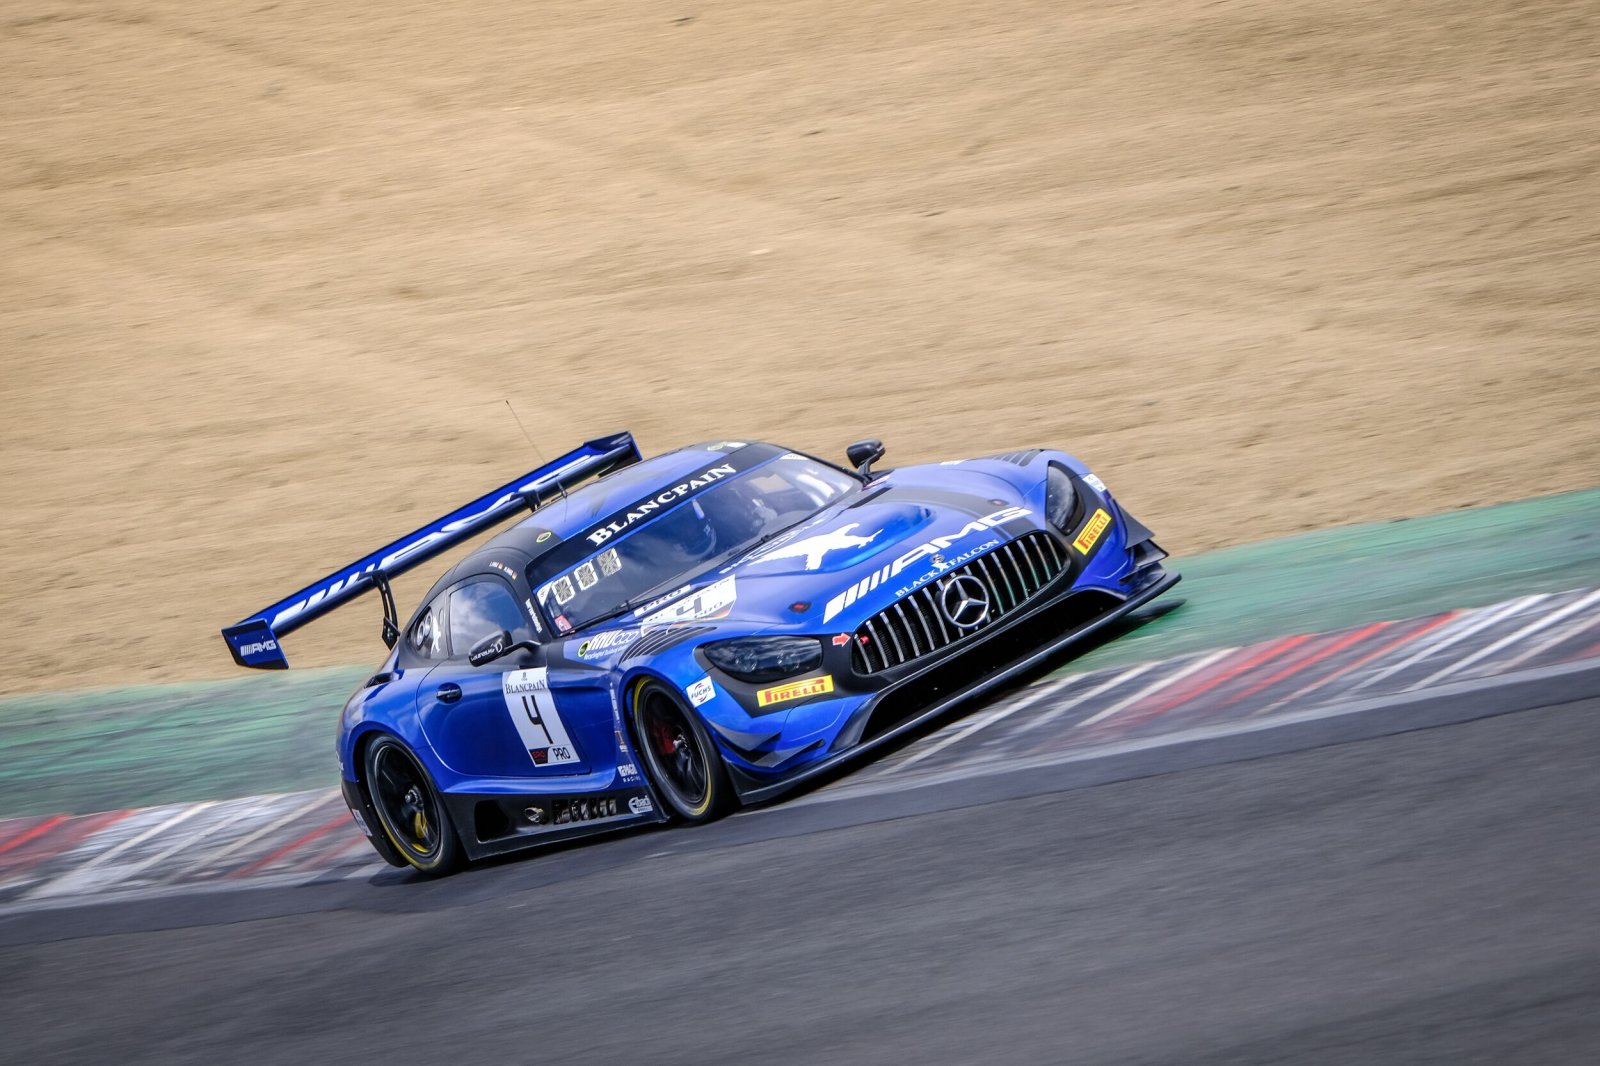 Engel puts Black Falcon Mercedes-AMG on top in unpredictable FP2